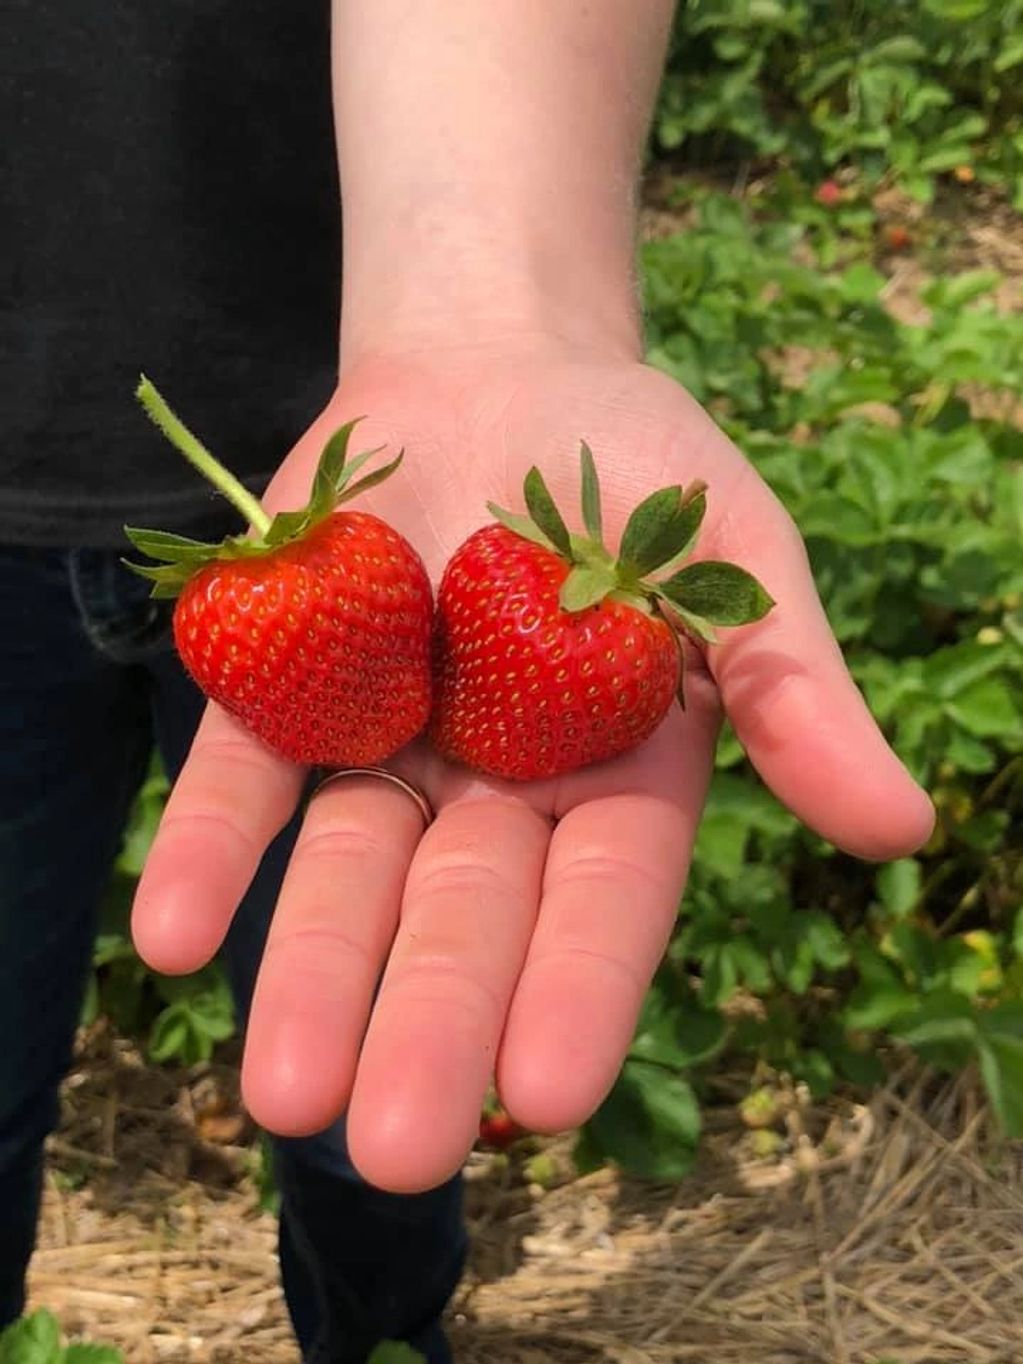 Delicious strawberries will be back again next season! We harvest our berries between June and Octob